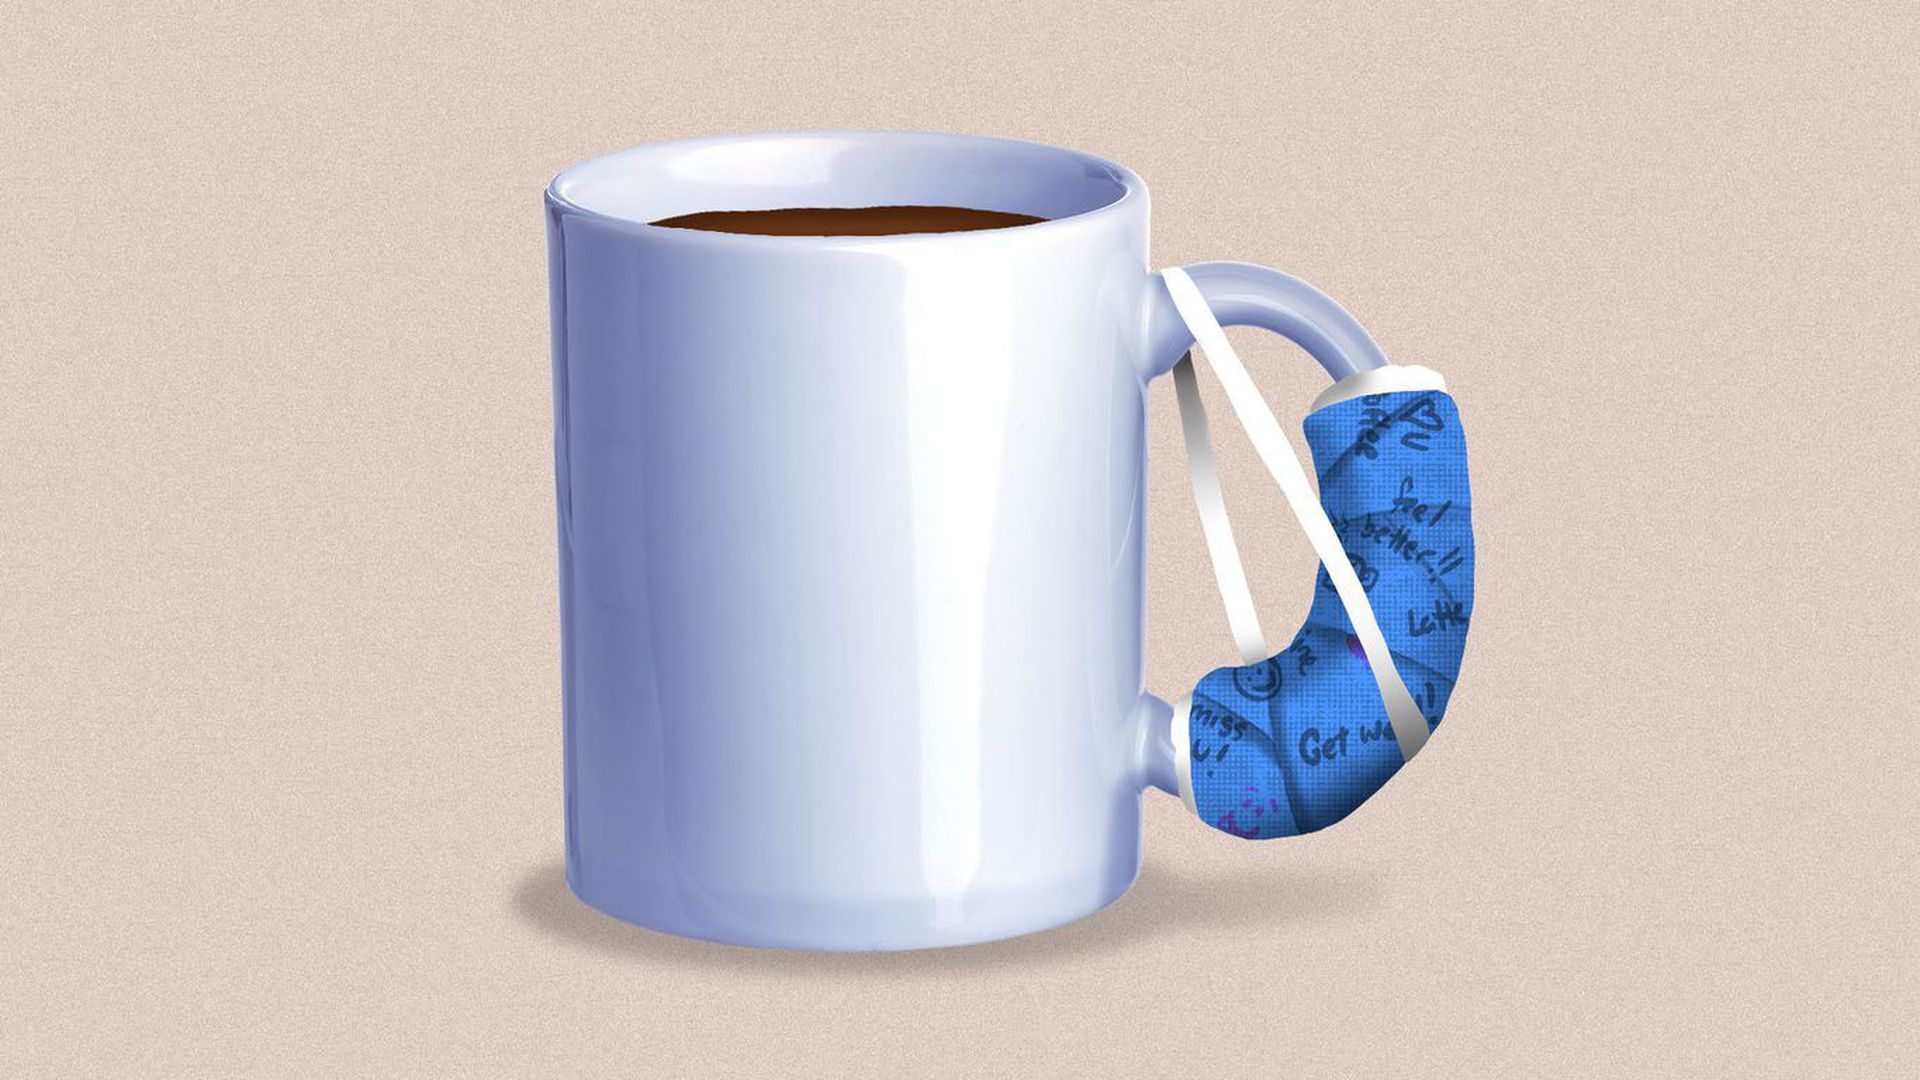 Illustration of an injured coffee mug with a cast and a sling on its handle.